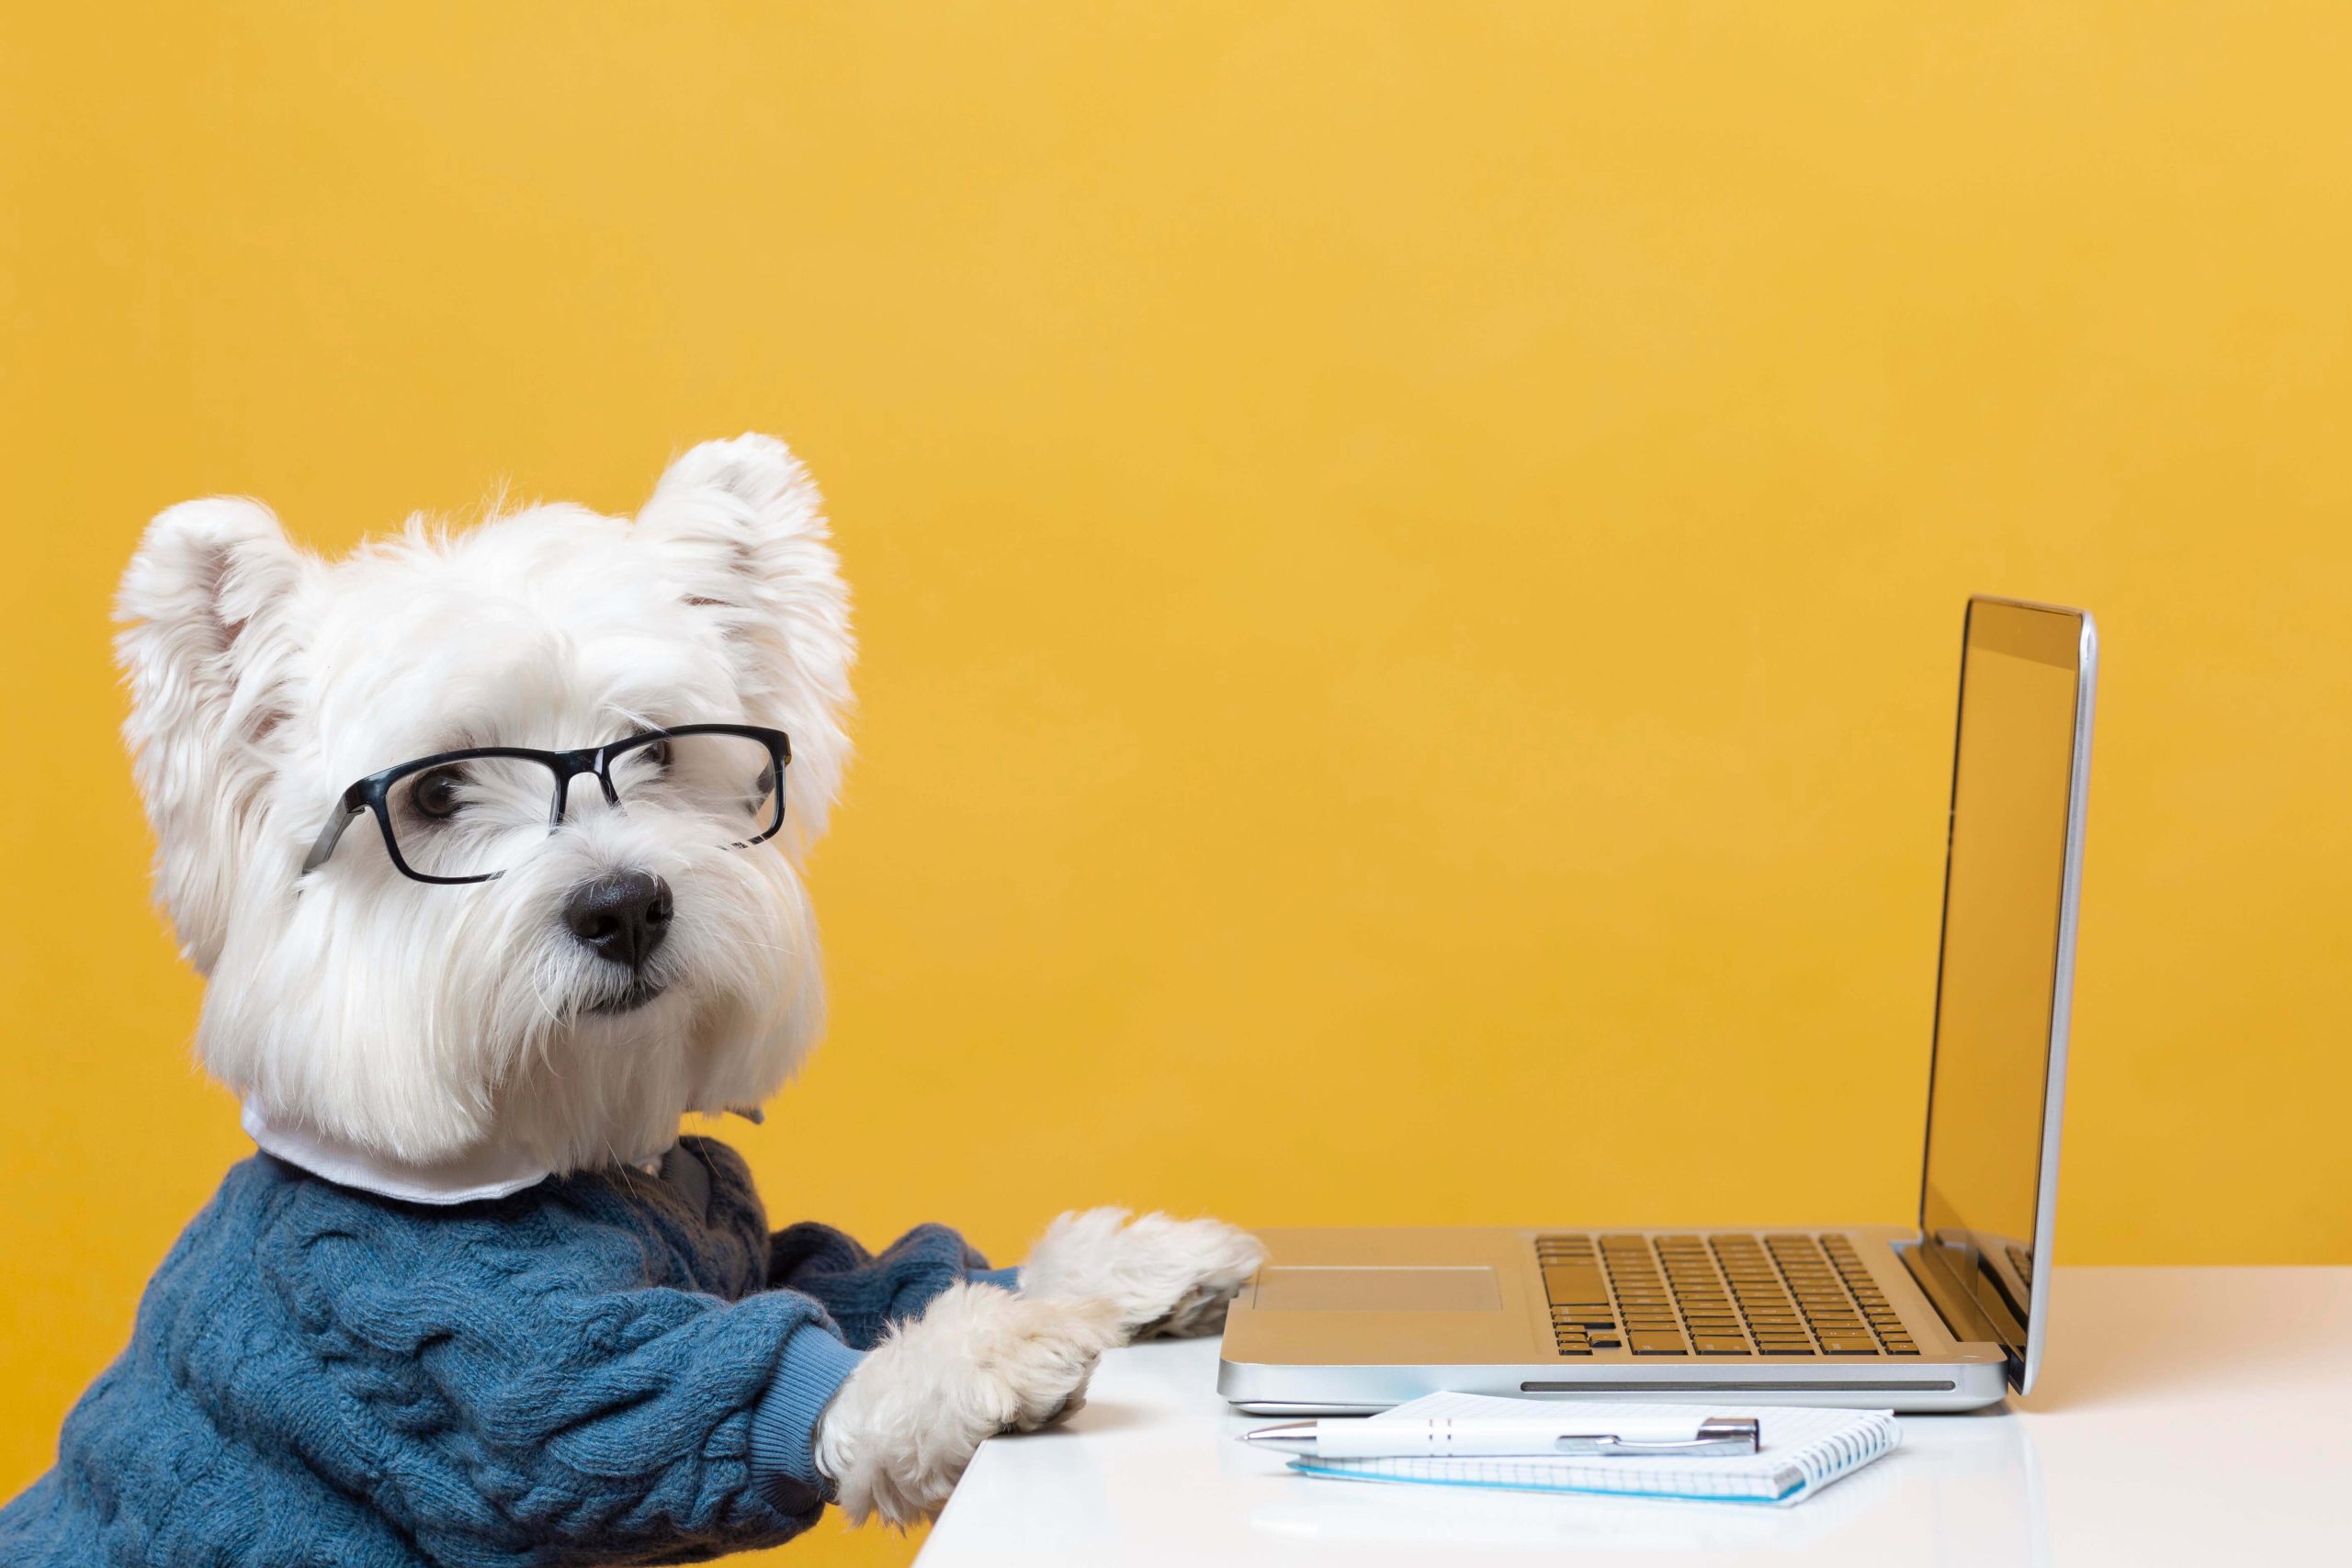 Find Out Your Dog’s IQ With This Simple ”Intelligence Test”